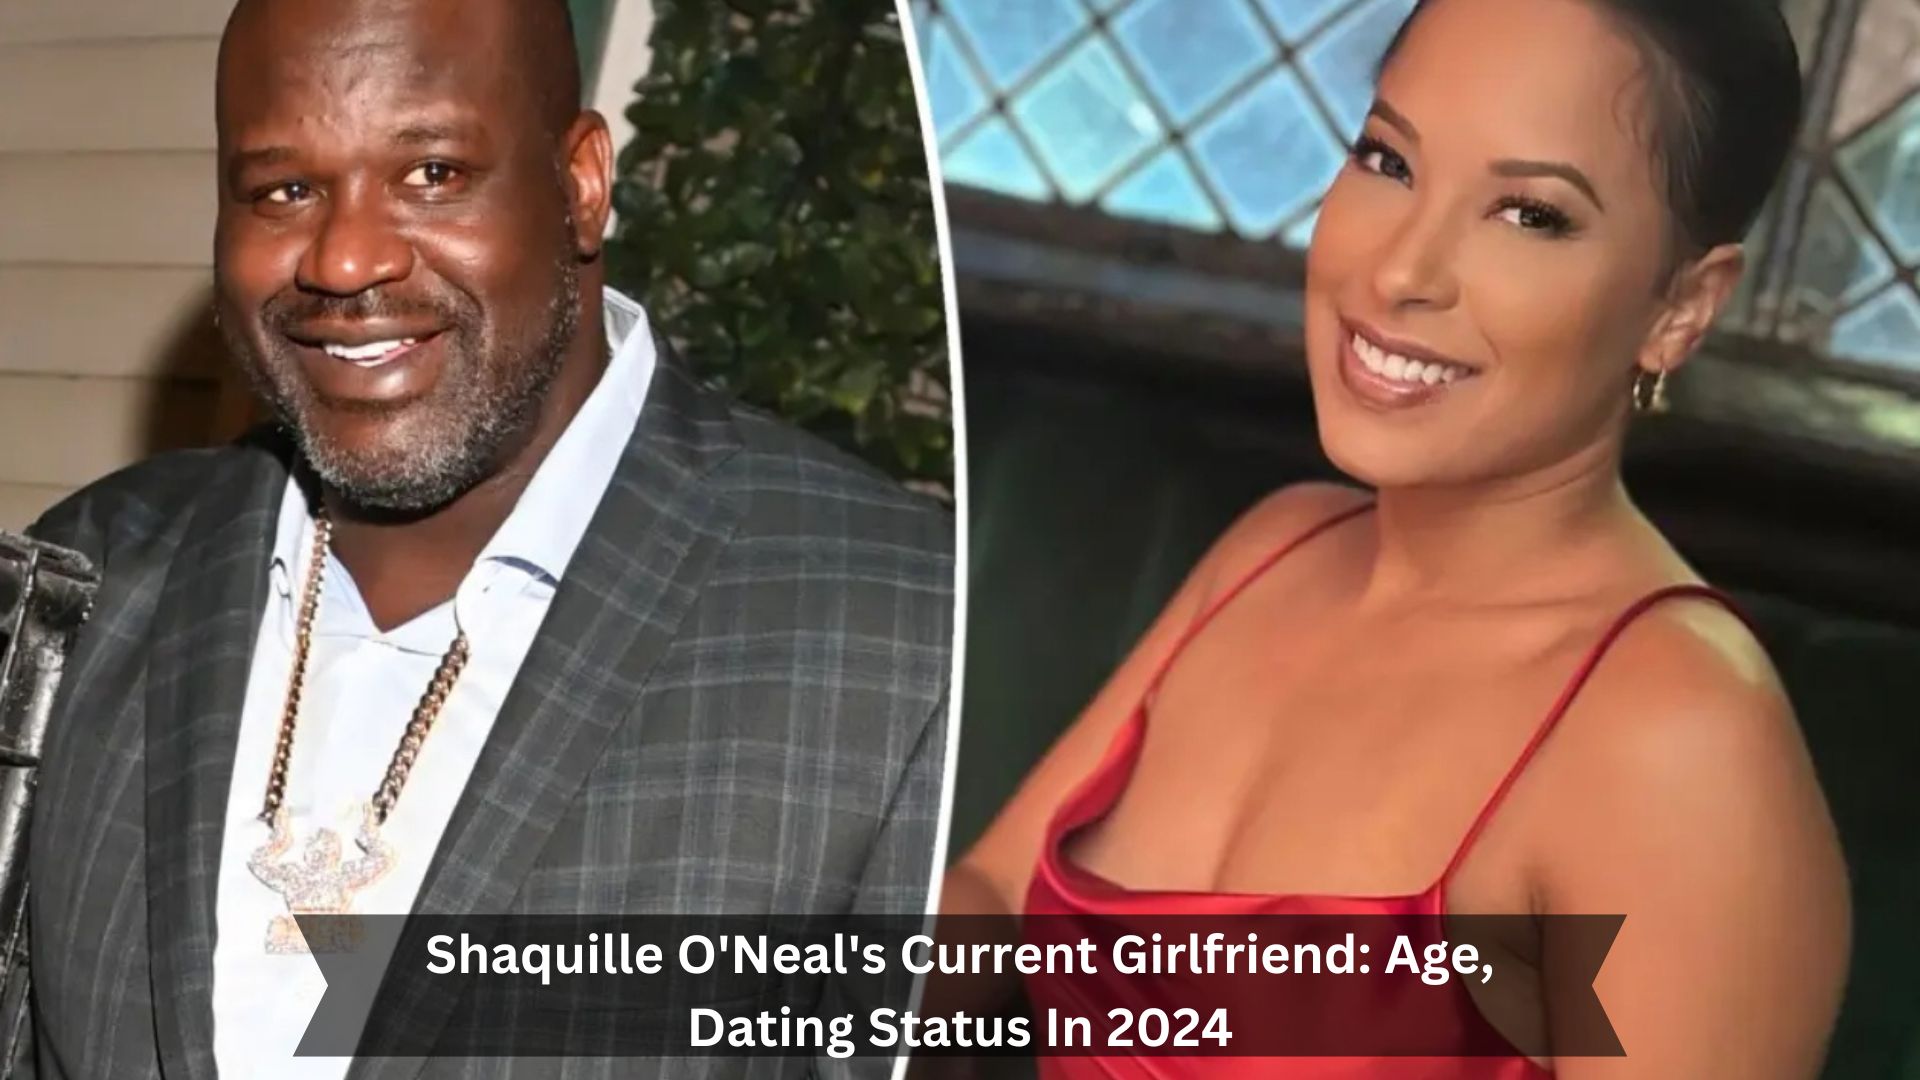 Shaquille-ONeals-Current-Girlfriend-Age-Dating-Status-In-2024